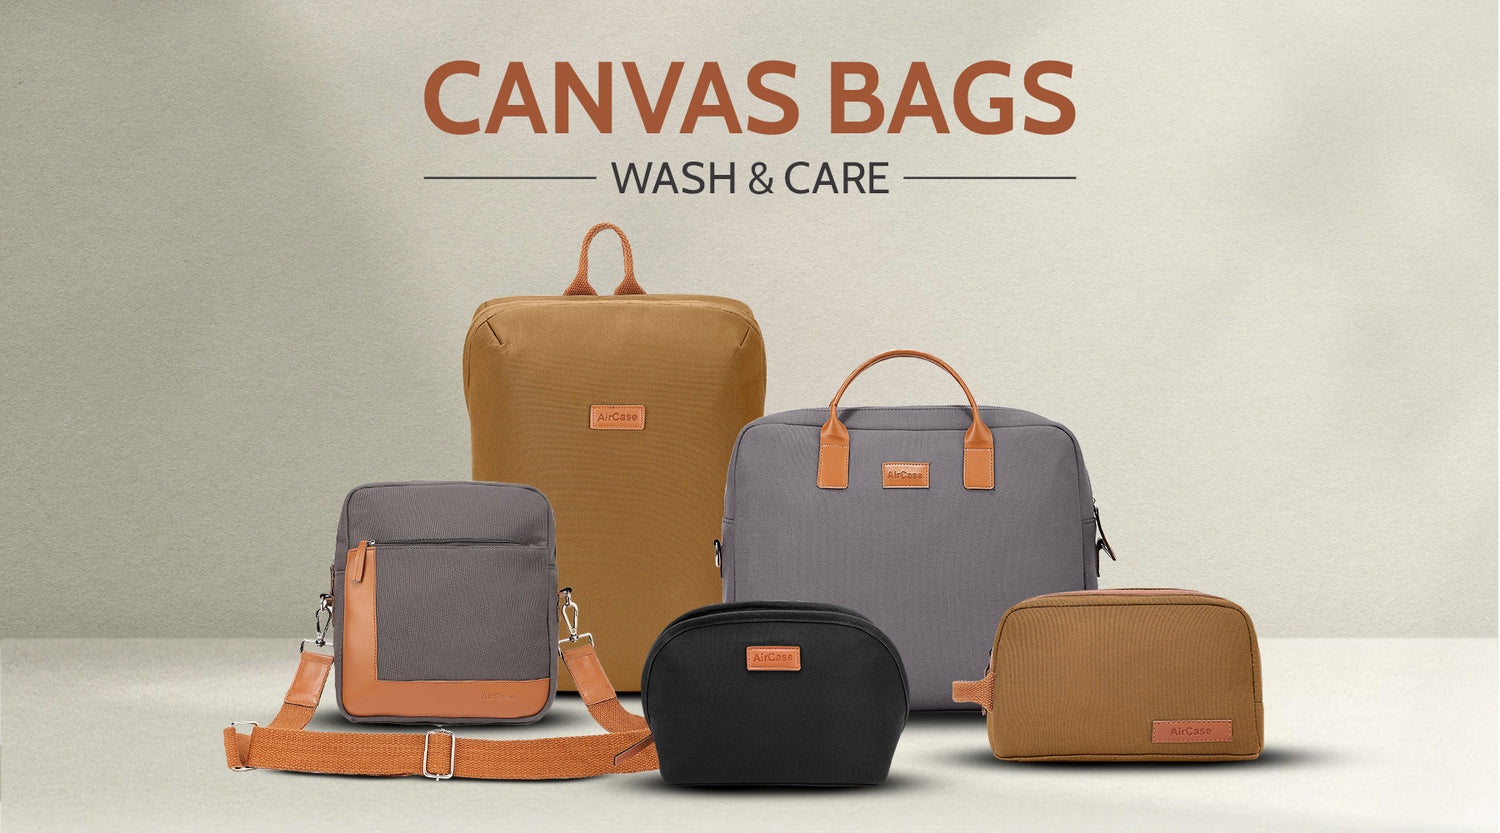 How to clean Canvas bags